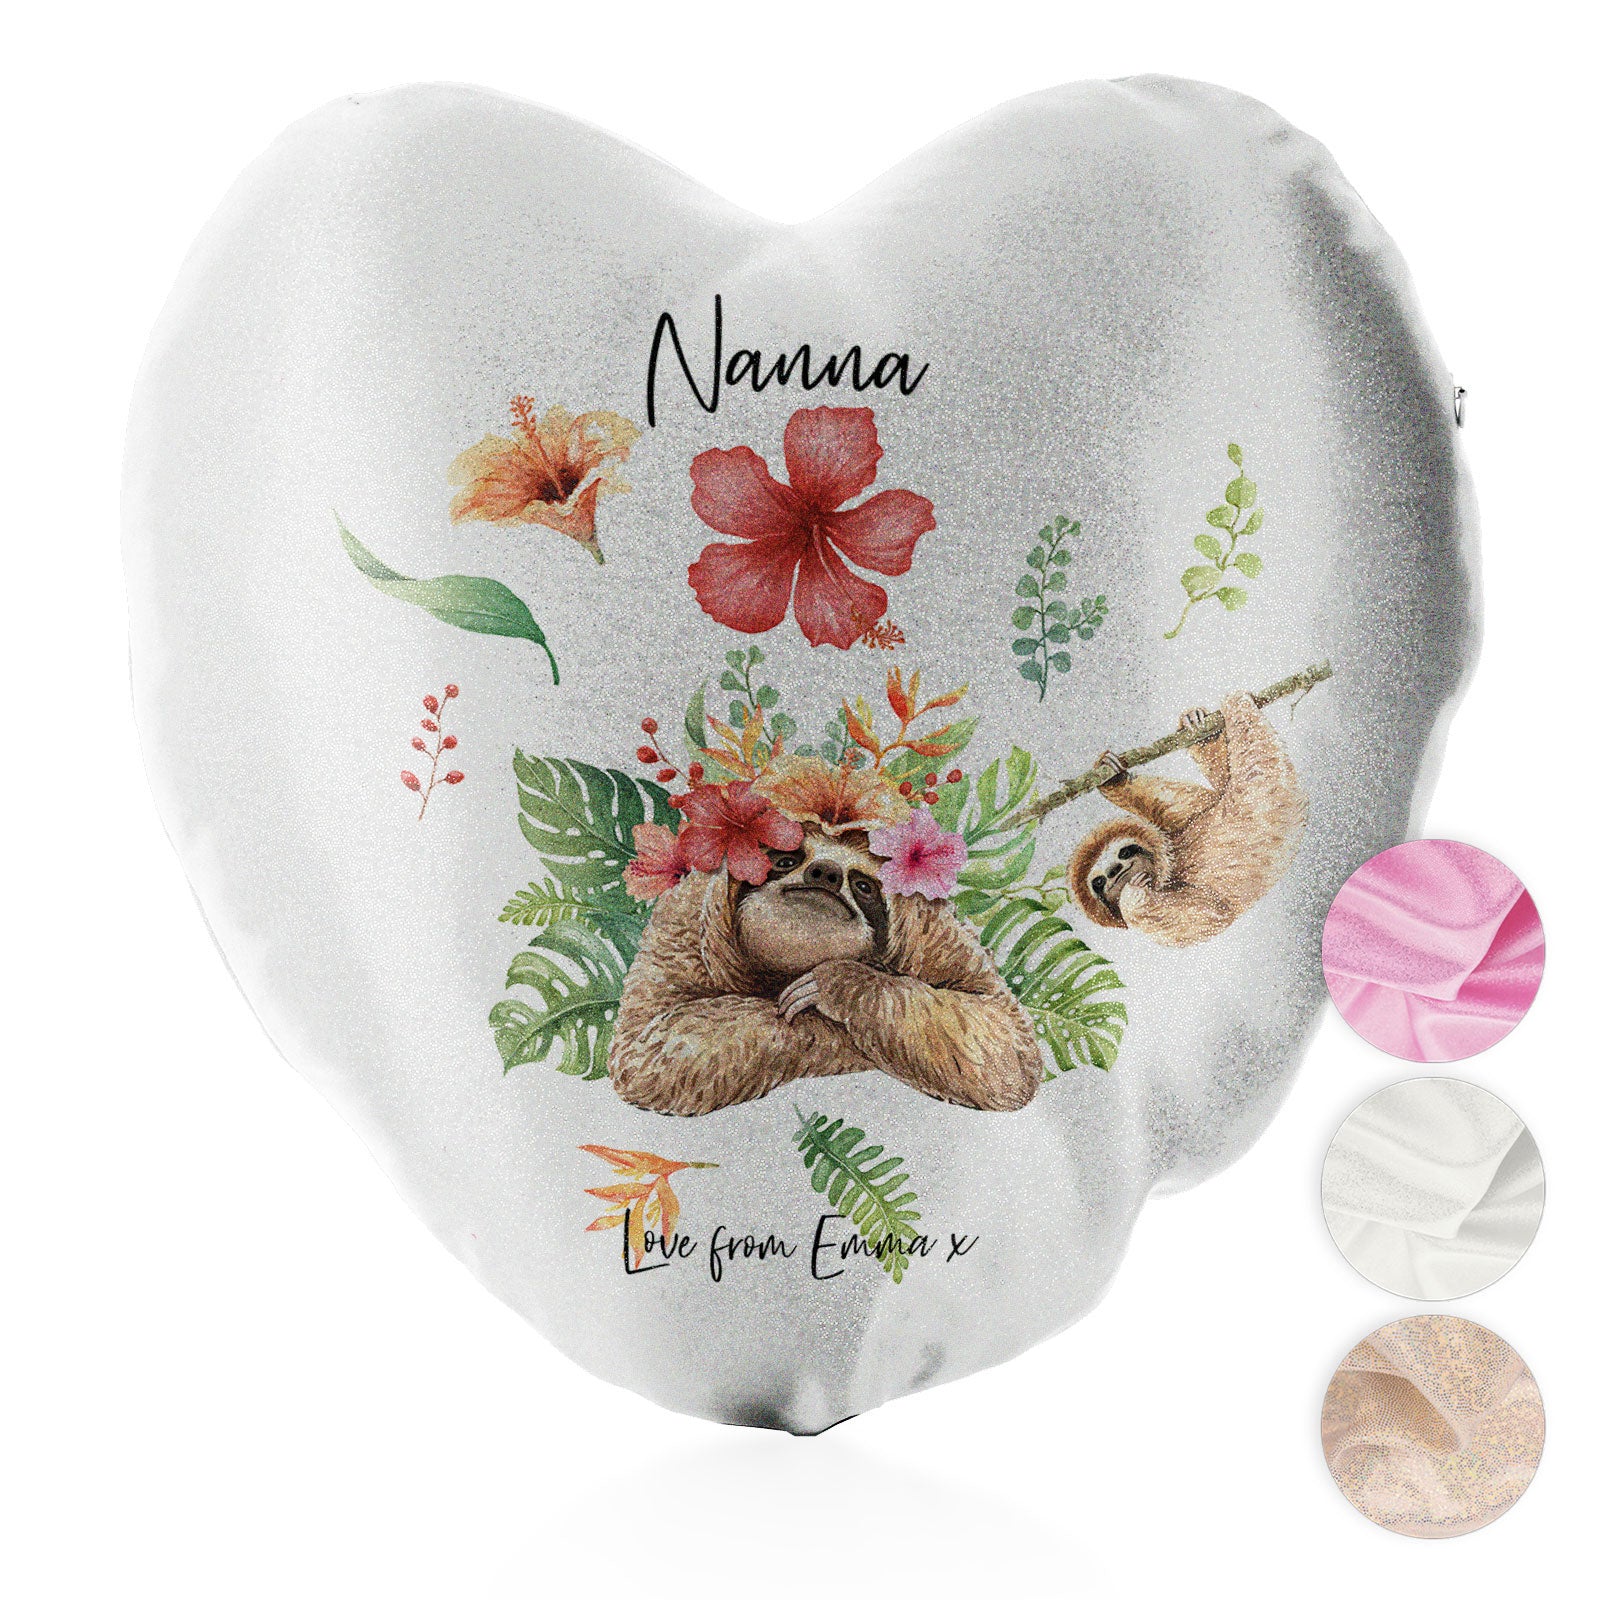 Personalised Glitter Heart Cushion with Stylish Text and Floral Mum and Baby Sloths